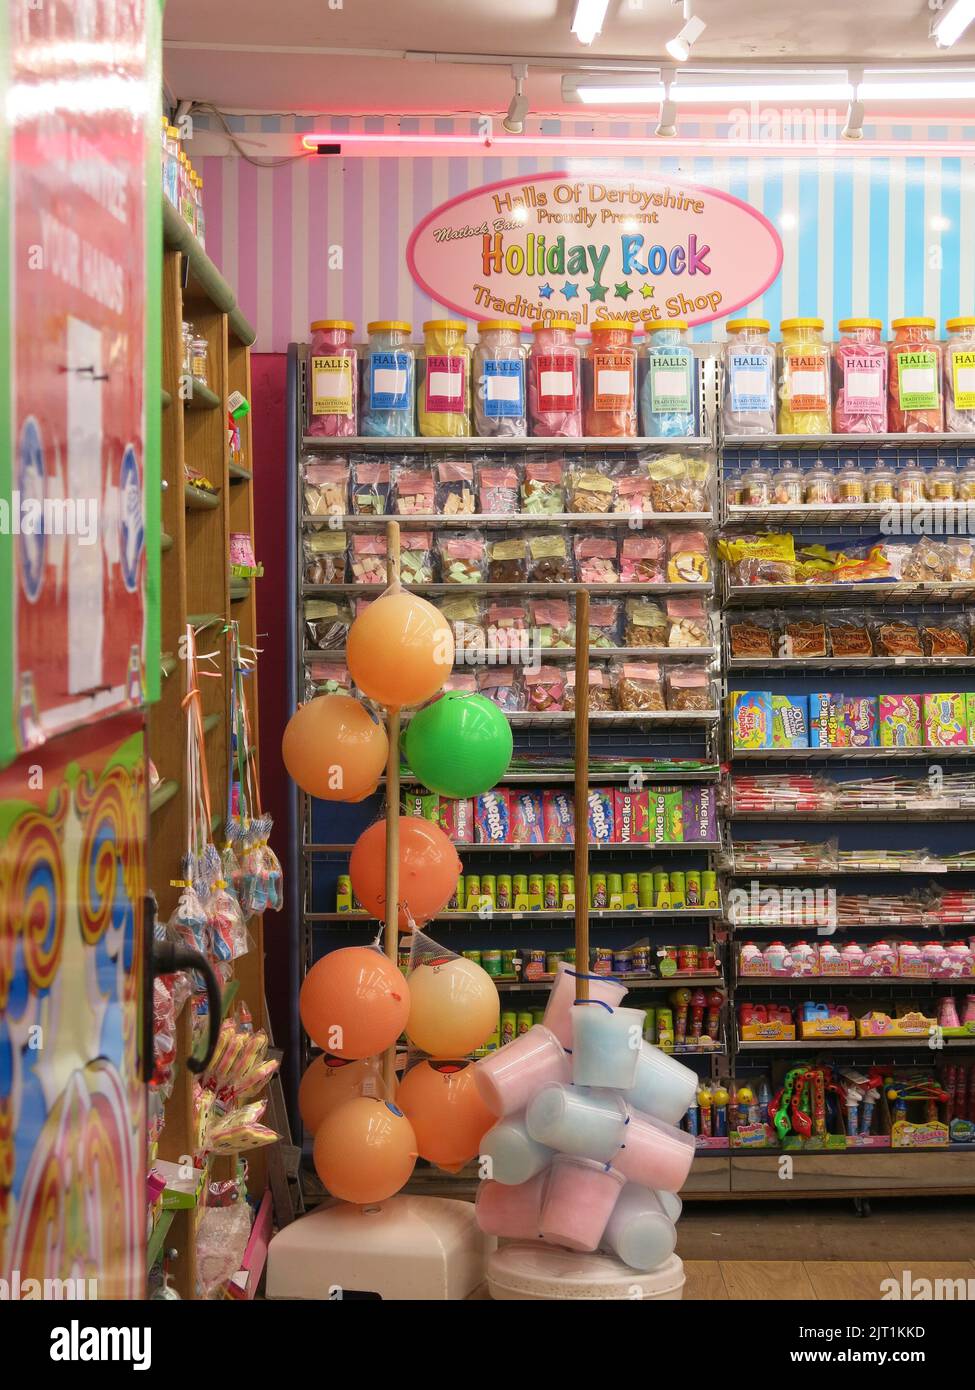 The interior of a sweet shop in the spa town of Matlock Bath selling candyfloss, holiday rock and lots of seaside treats. Stock Photo